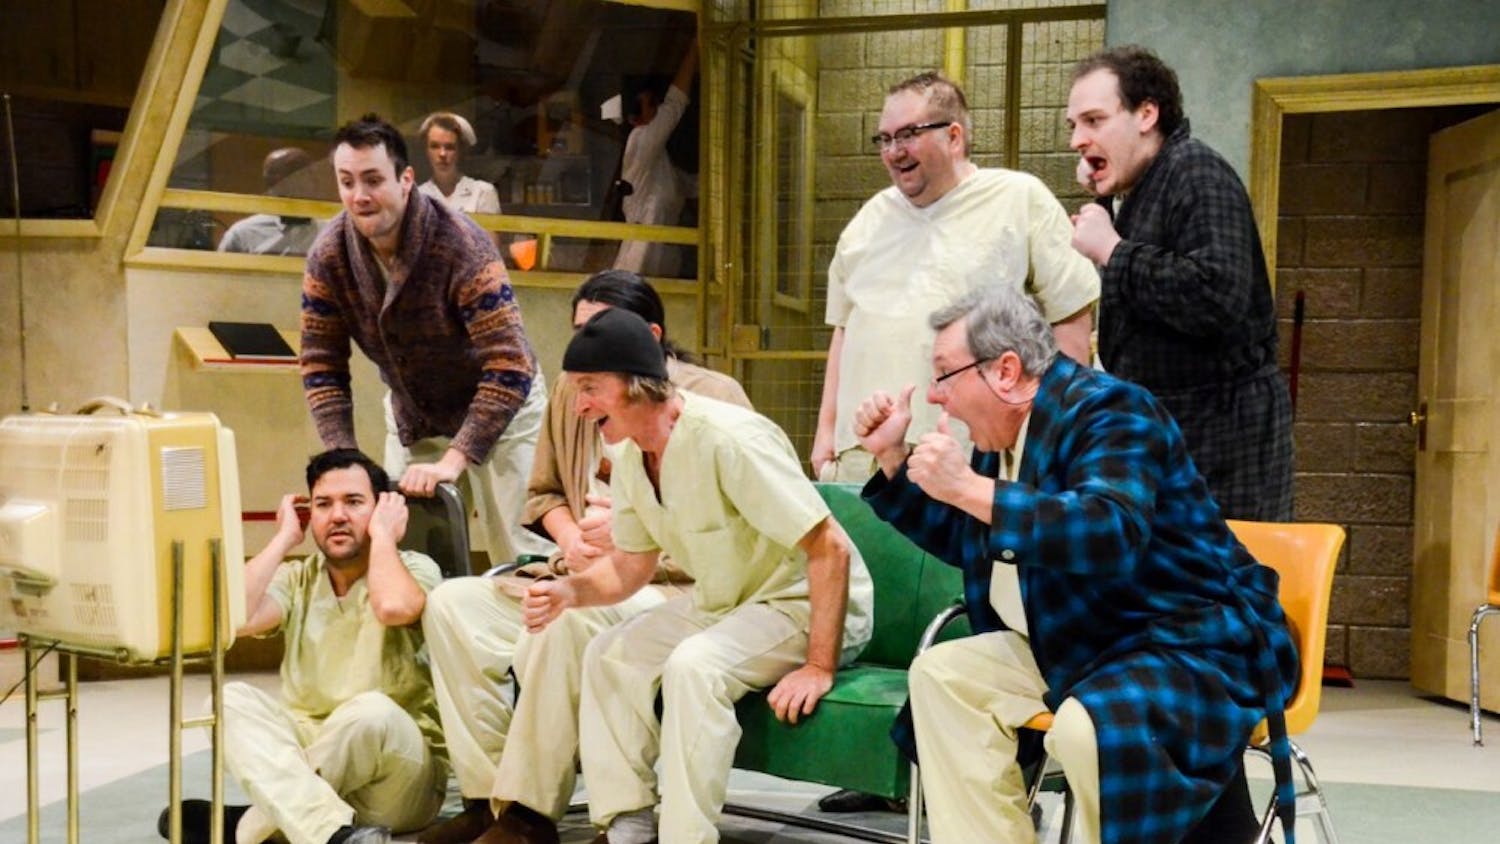 "One Flew Over the Cuckoo's Nest" will be played at from Feb. 12 - 28 at Ivy Tech Waldron Auditorium. The play is based on Ken Kesey's novel. 